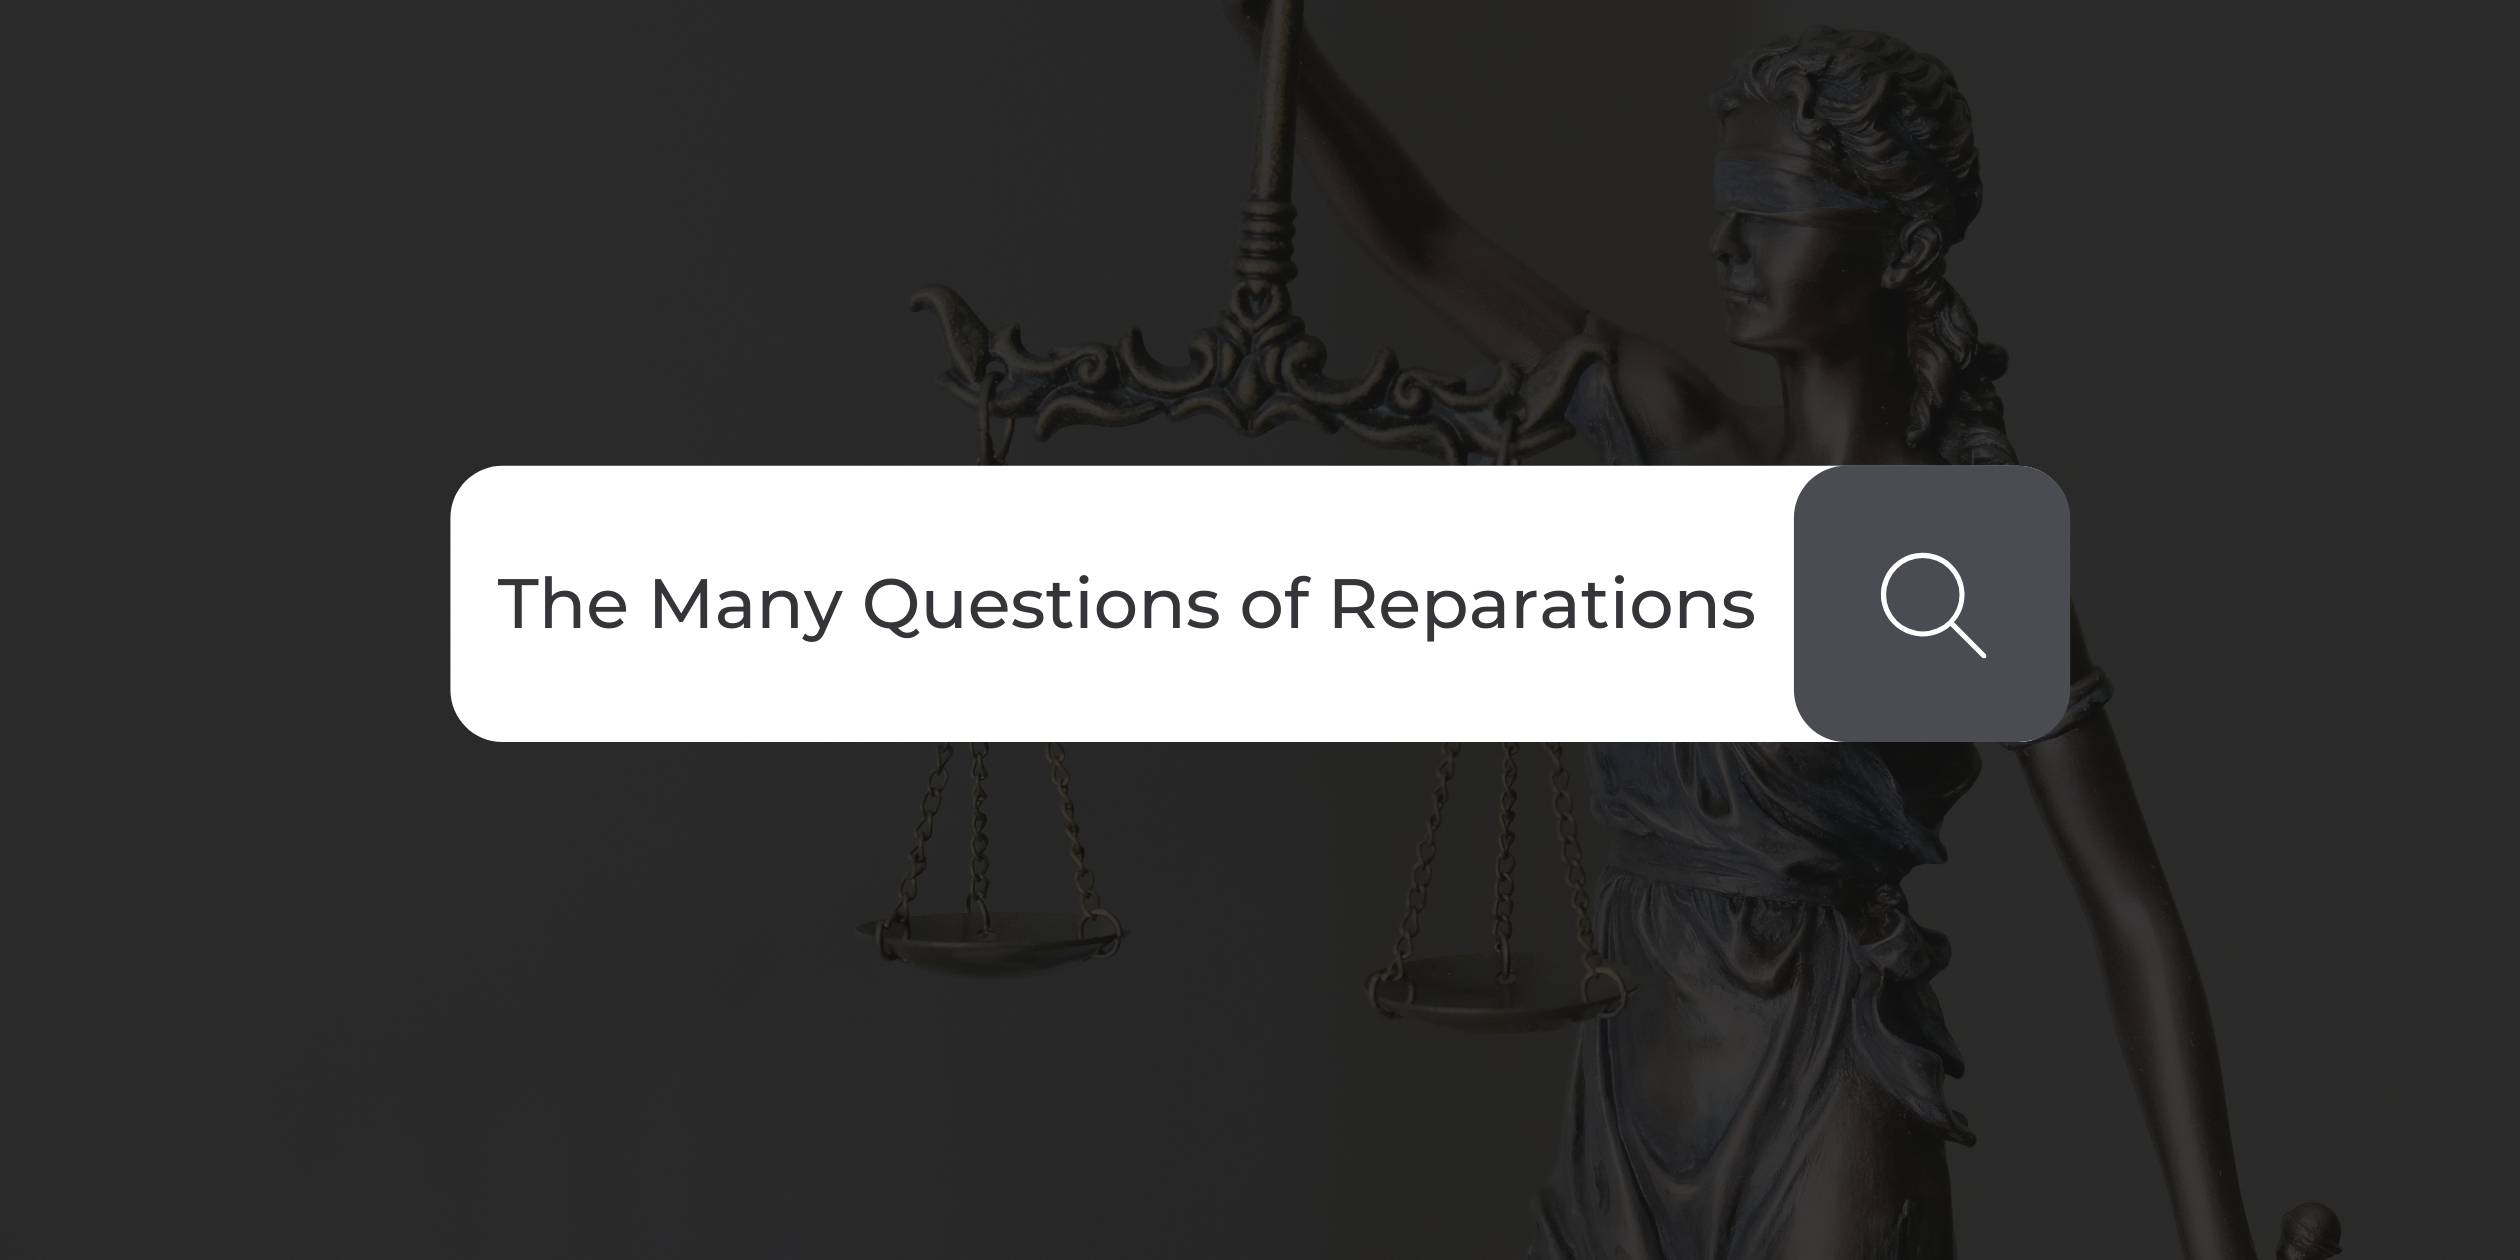 The Many Questions of Reparations